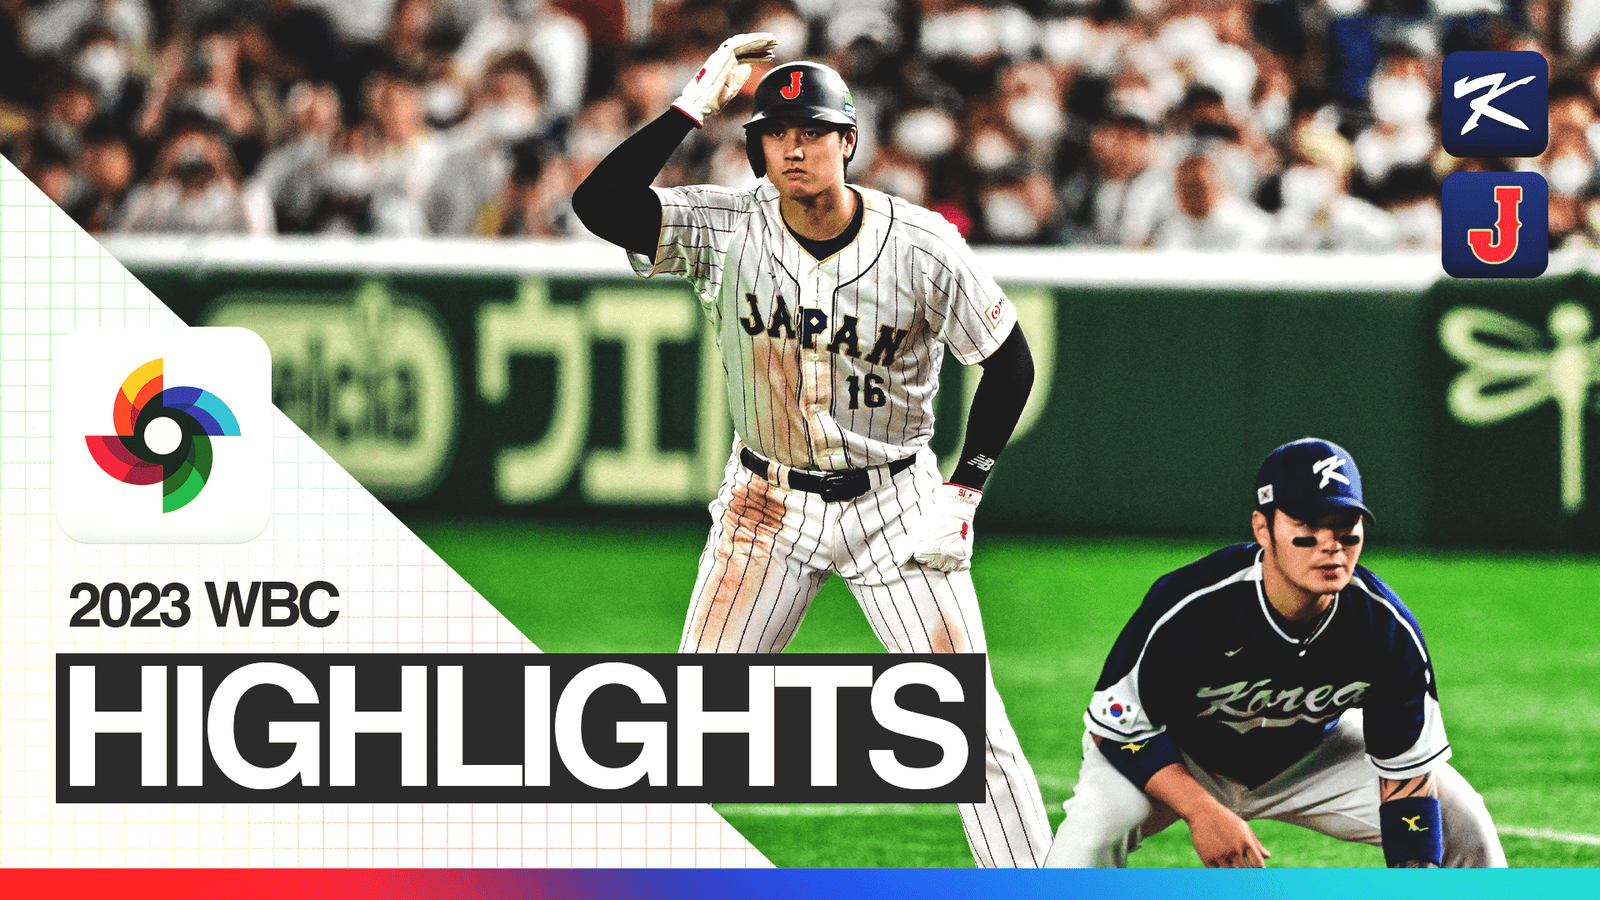 MLB Twitter reacts to Samurai Japan's World Baseball classic roster: Very  good looking team from Japan Cannot wait to see Roki Sesaki!